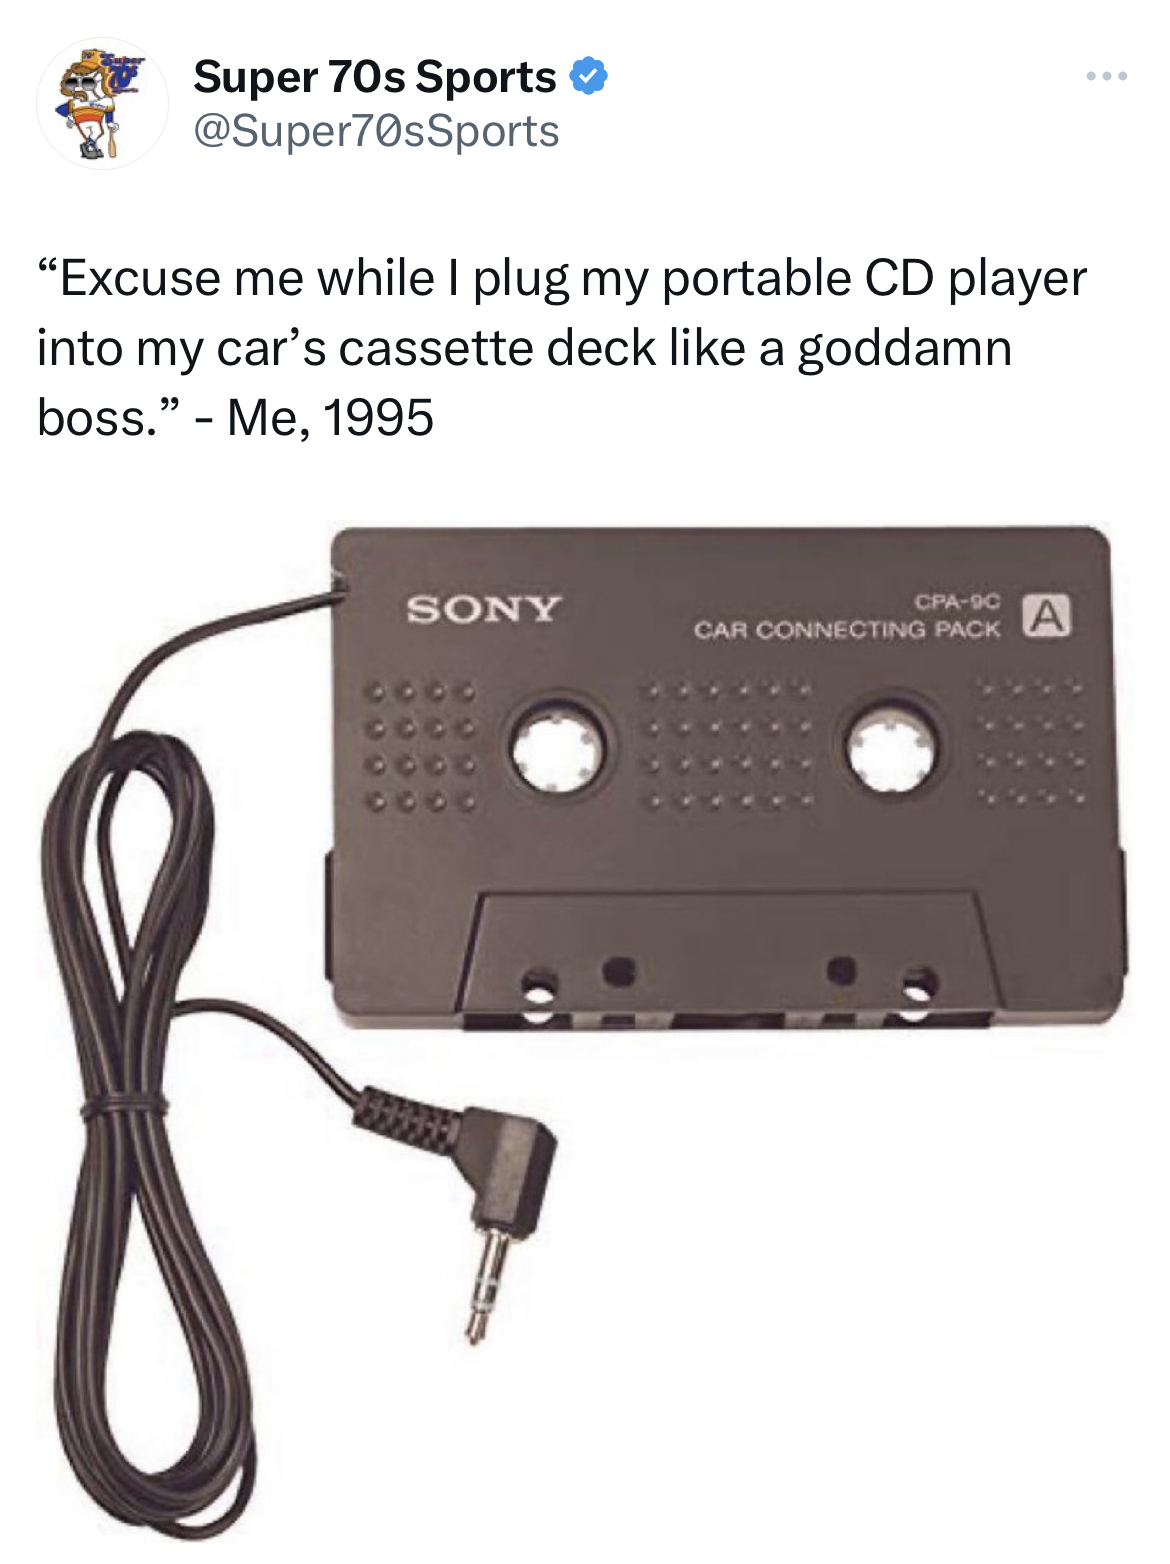 Unhinged Tweets - cassette adapter for car - Super 70s Sports "Excuse me while I plug my portable Cd player into my car's cassette deck a goddamn boss." Me, 1995 Sony cccc Coco coco CpaSc A Car Connecting Pack A